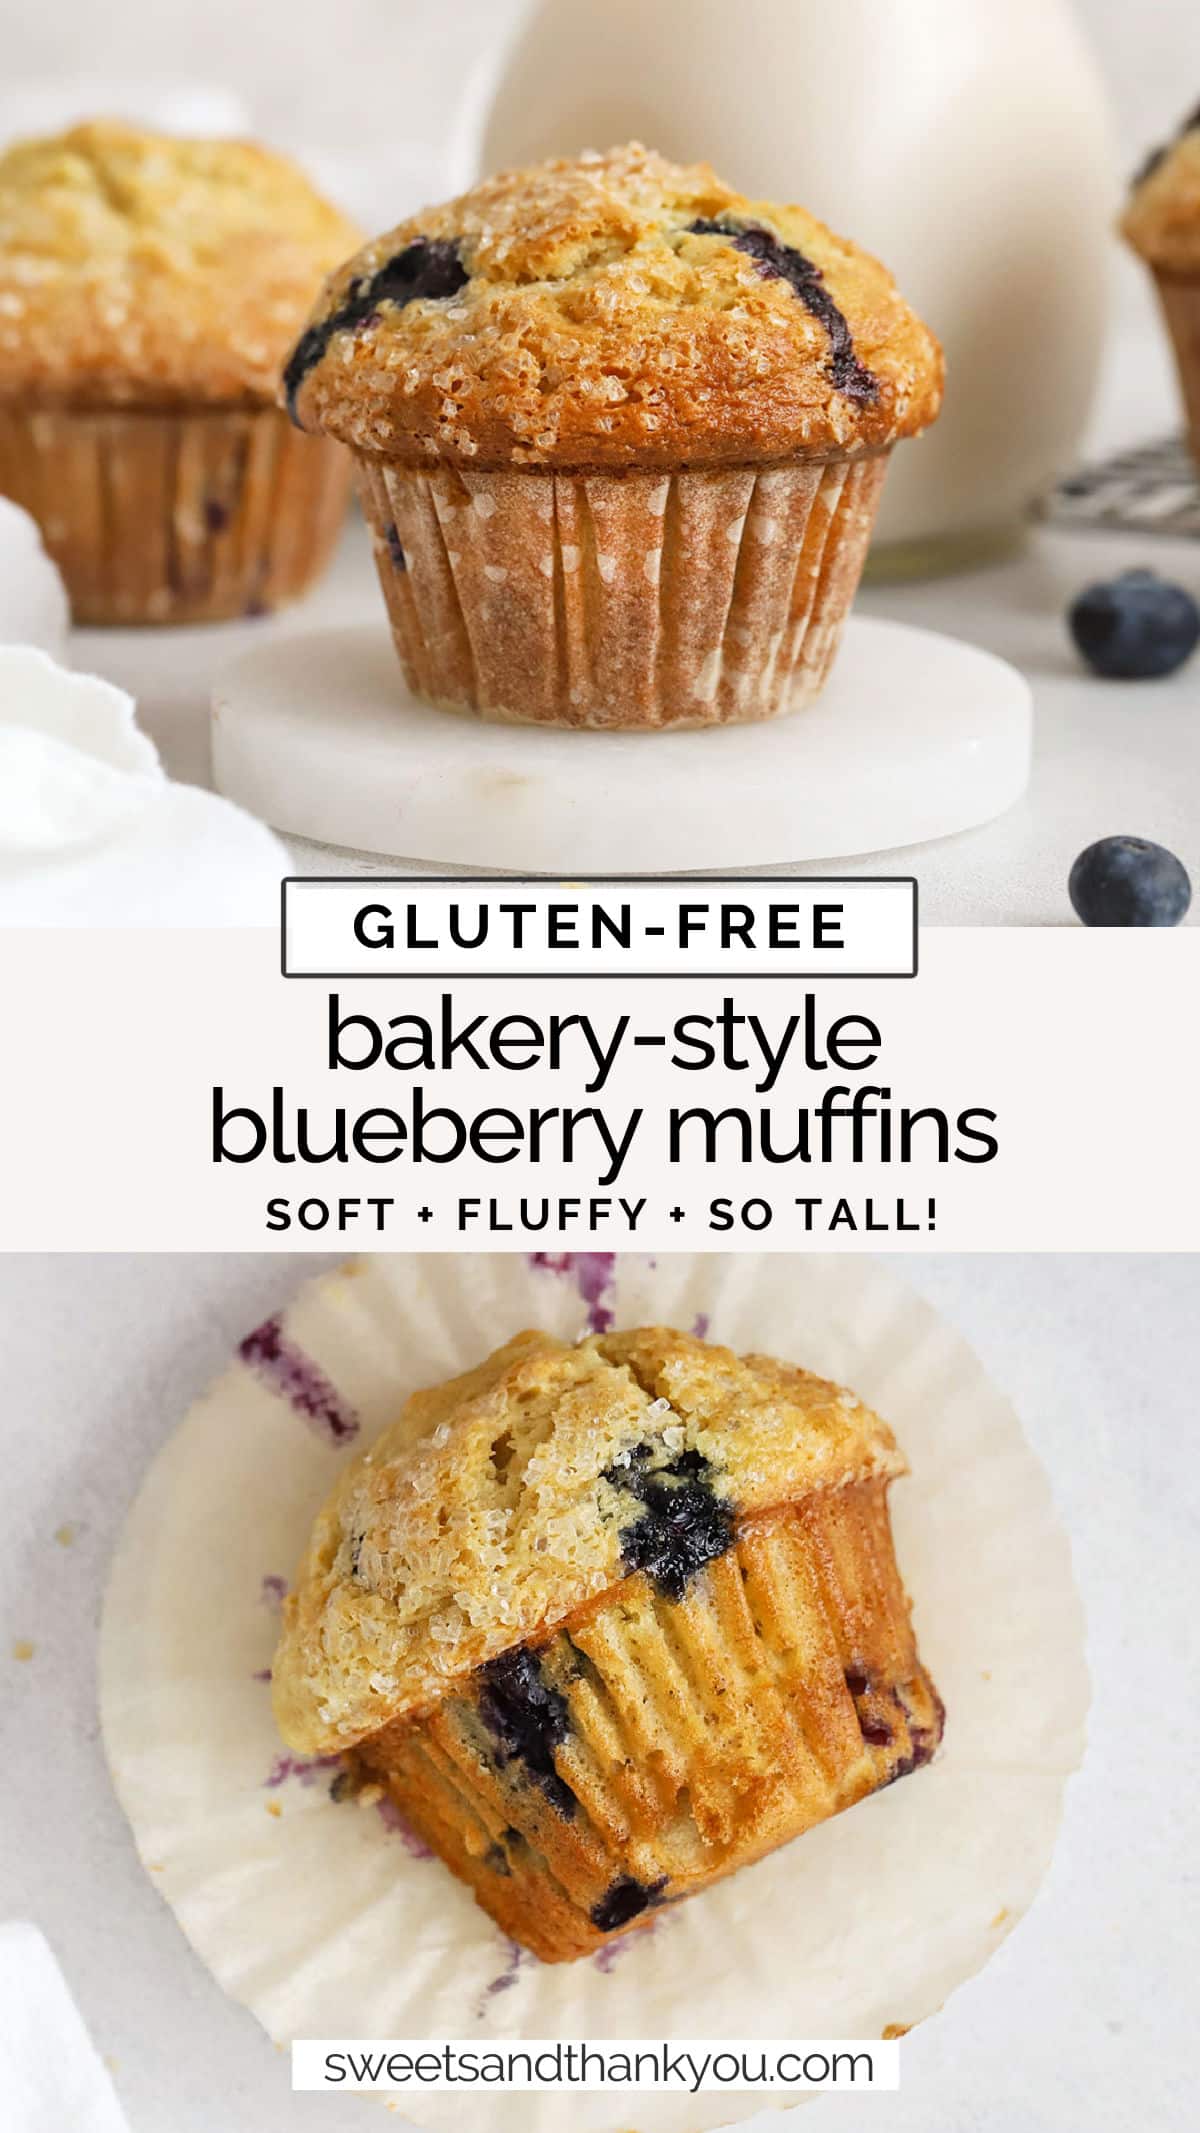 These bakery-style gluten-free blueberry muffins are light, fluffy, and packed with fresh blueberry flavor. They're perfect for a special breakfast or gluten-free brunch! / fluffy gluten-free blueberry muffins / easy gluten-free blueberry muffins / gluten-free blueberry muffin recipe / gluten-free muffin recipe / gluten-free sour cream blueberry muffins / gluten-free brunch recipe / gluten-free muffins